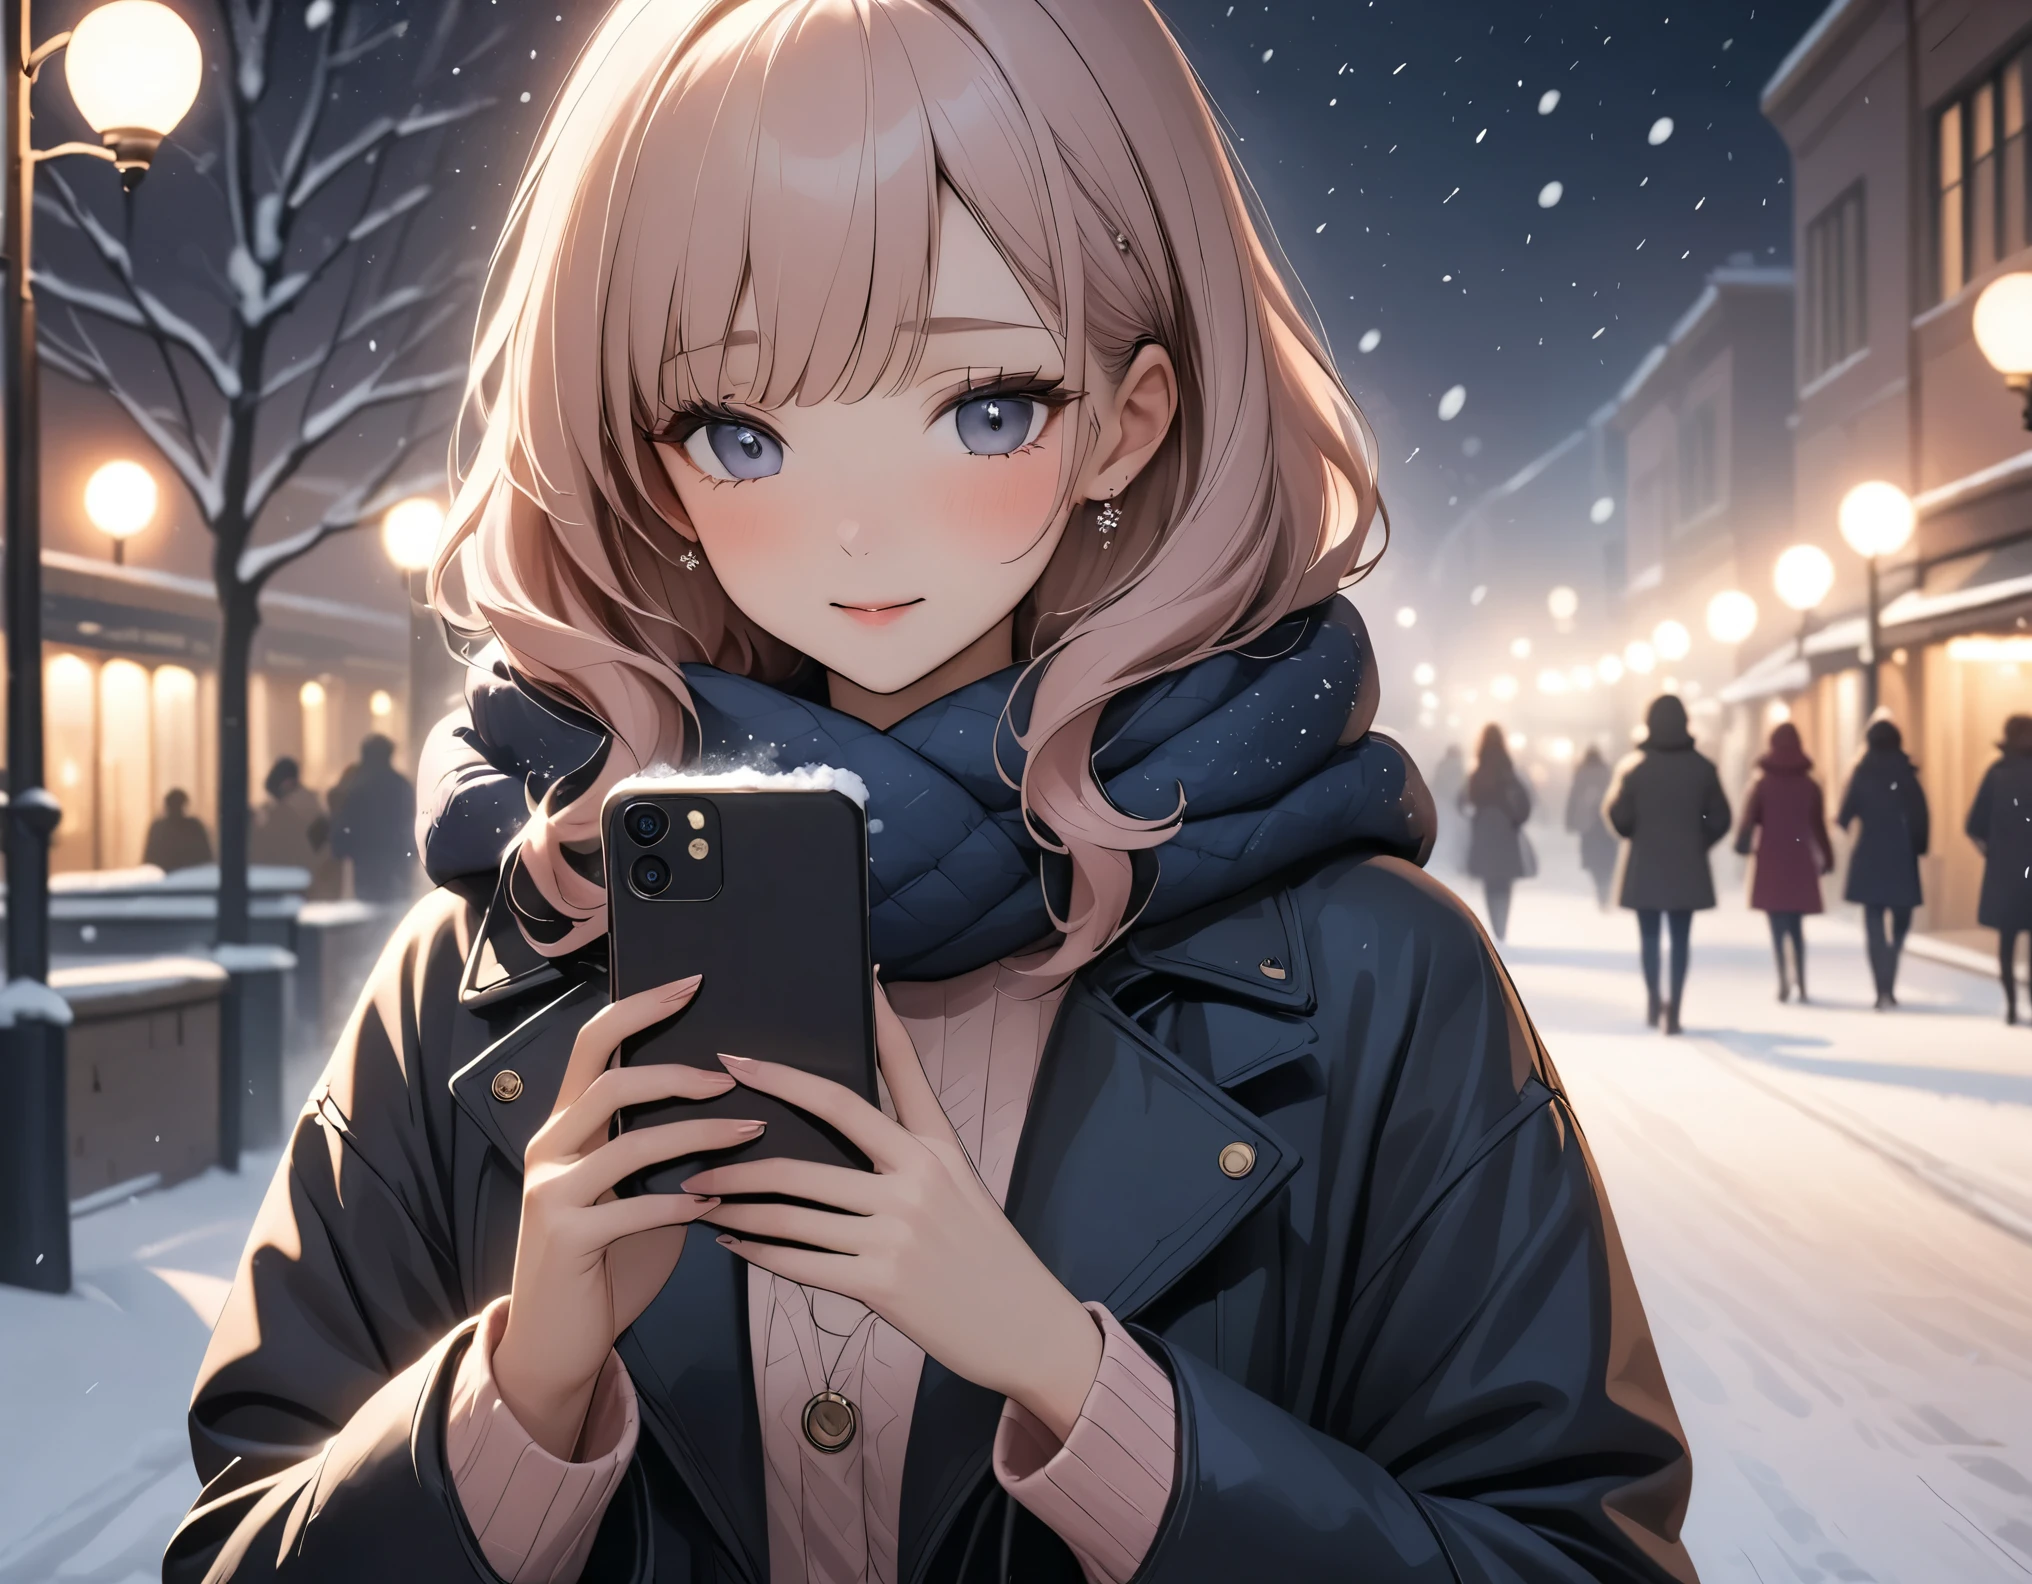 Beautiful woman, street lights at night, Fiddling with smartphones, Hot Pants,  pink, snow, snowing, Passersby, night gradient, fine details, Subtle tones, There is a sense of tranquility in the picture.  